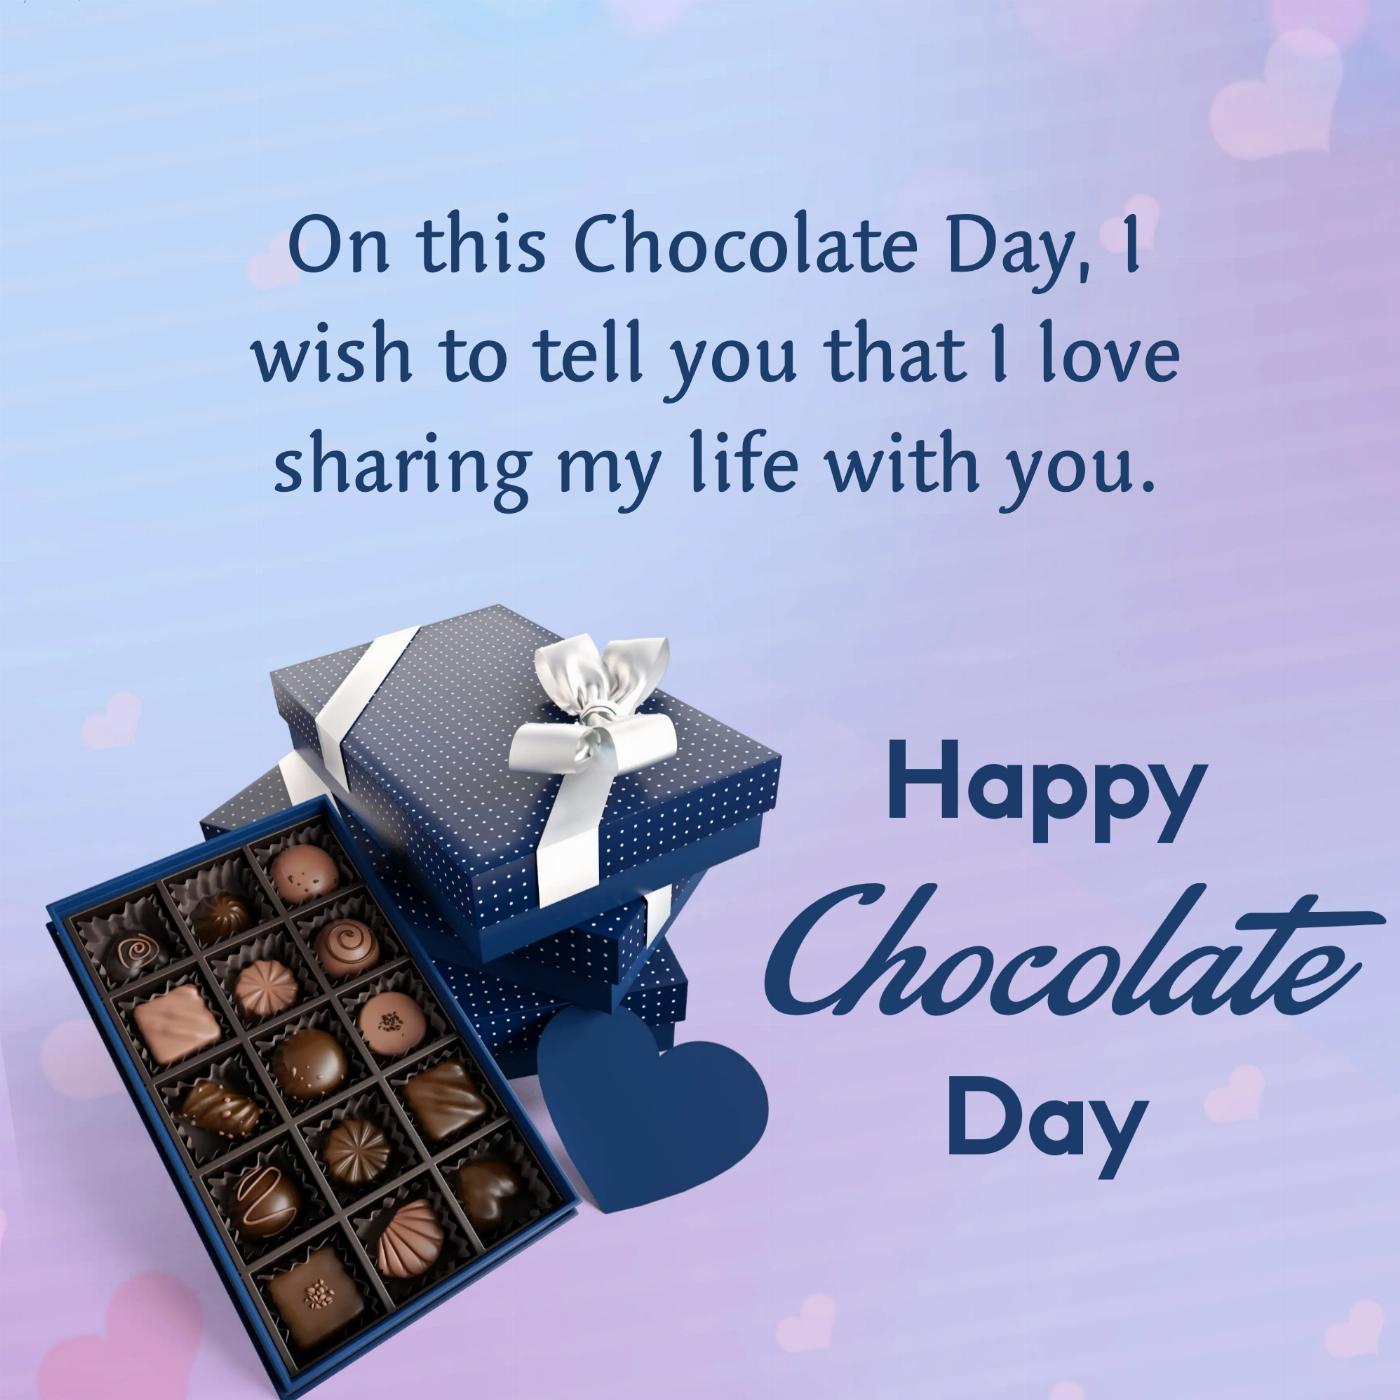 On this Chocolate Day I wish to tell you